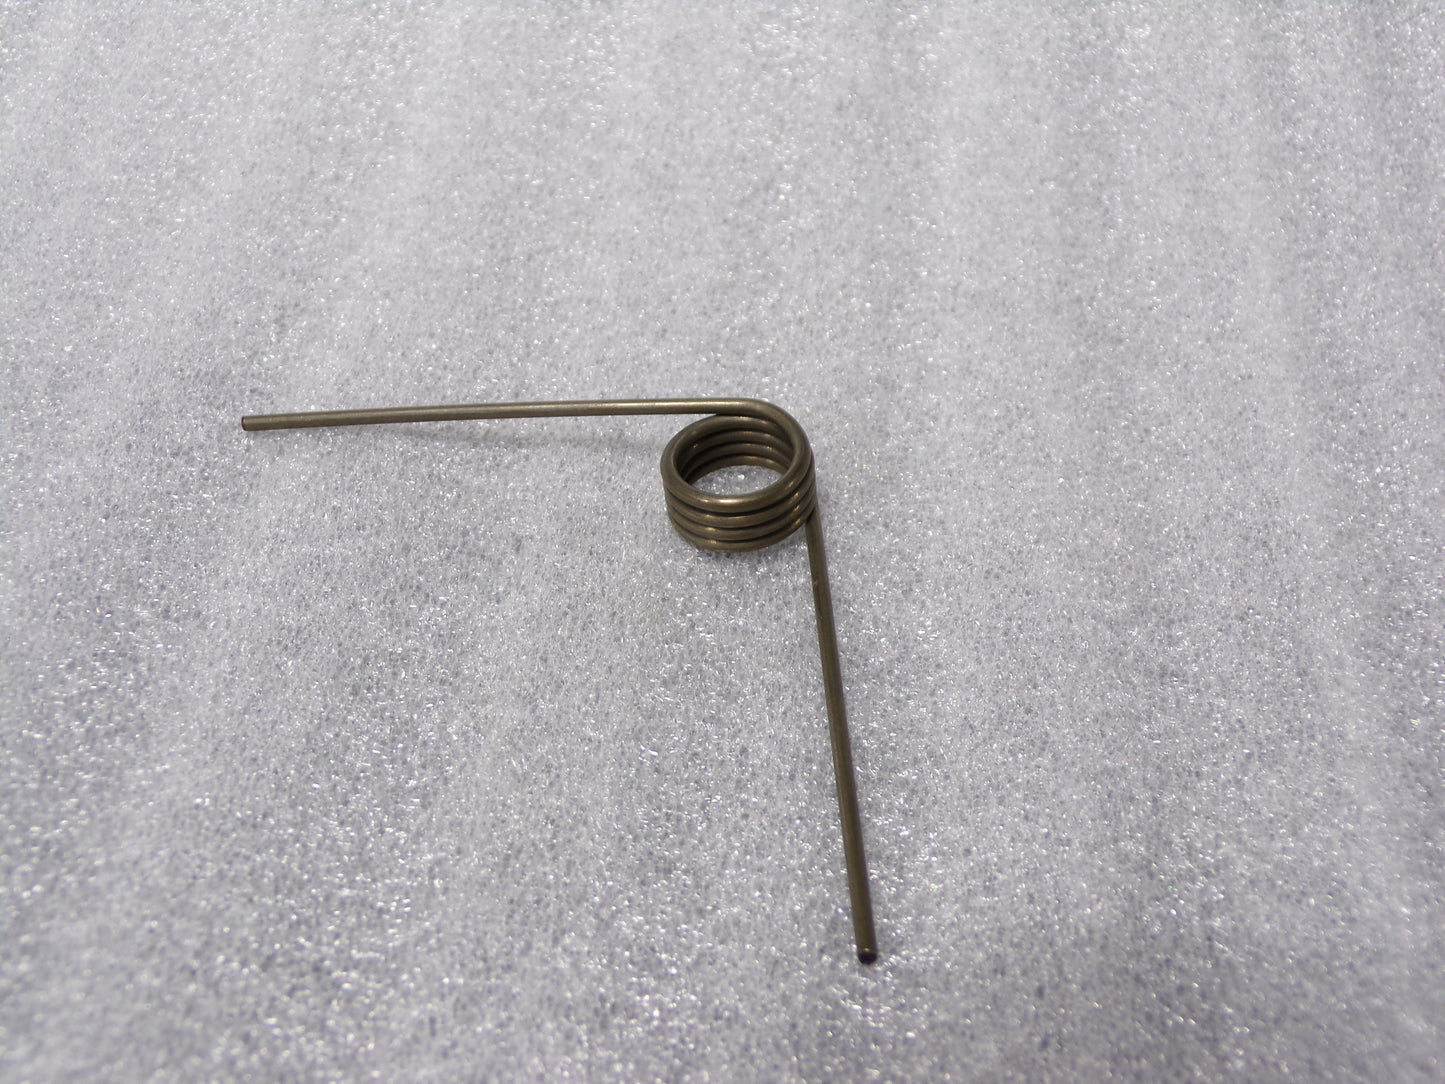 90 Degree Carbon Steel Music Wire Torsion Spring with 0.408 in Outside Dia. (CR00191-BT26)